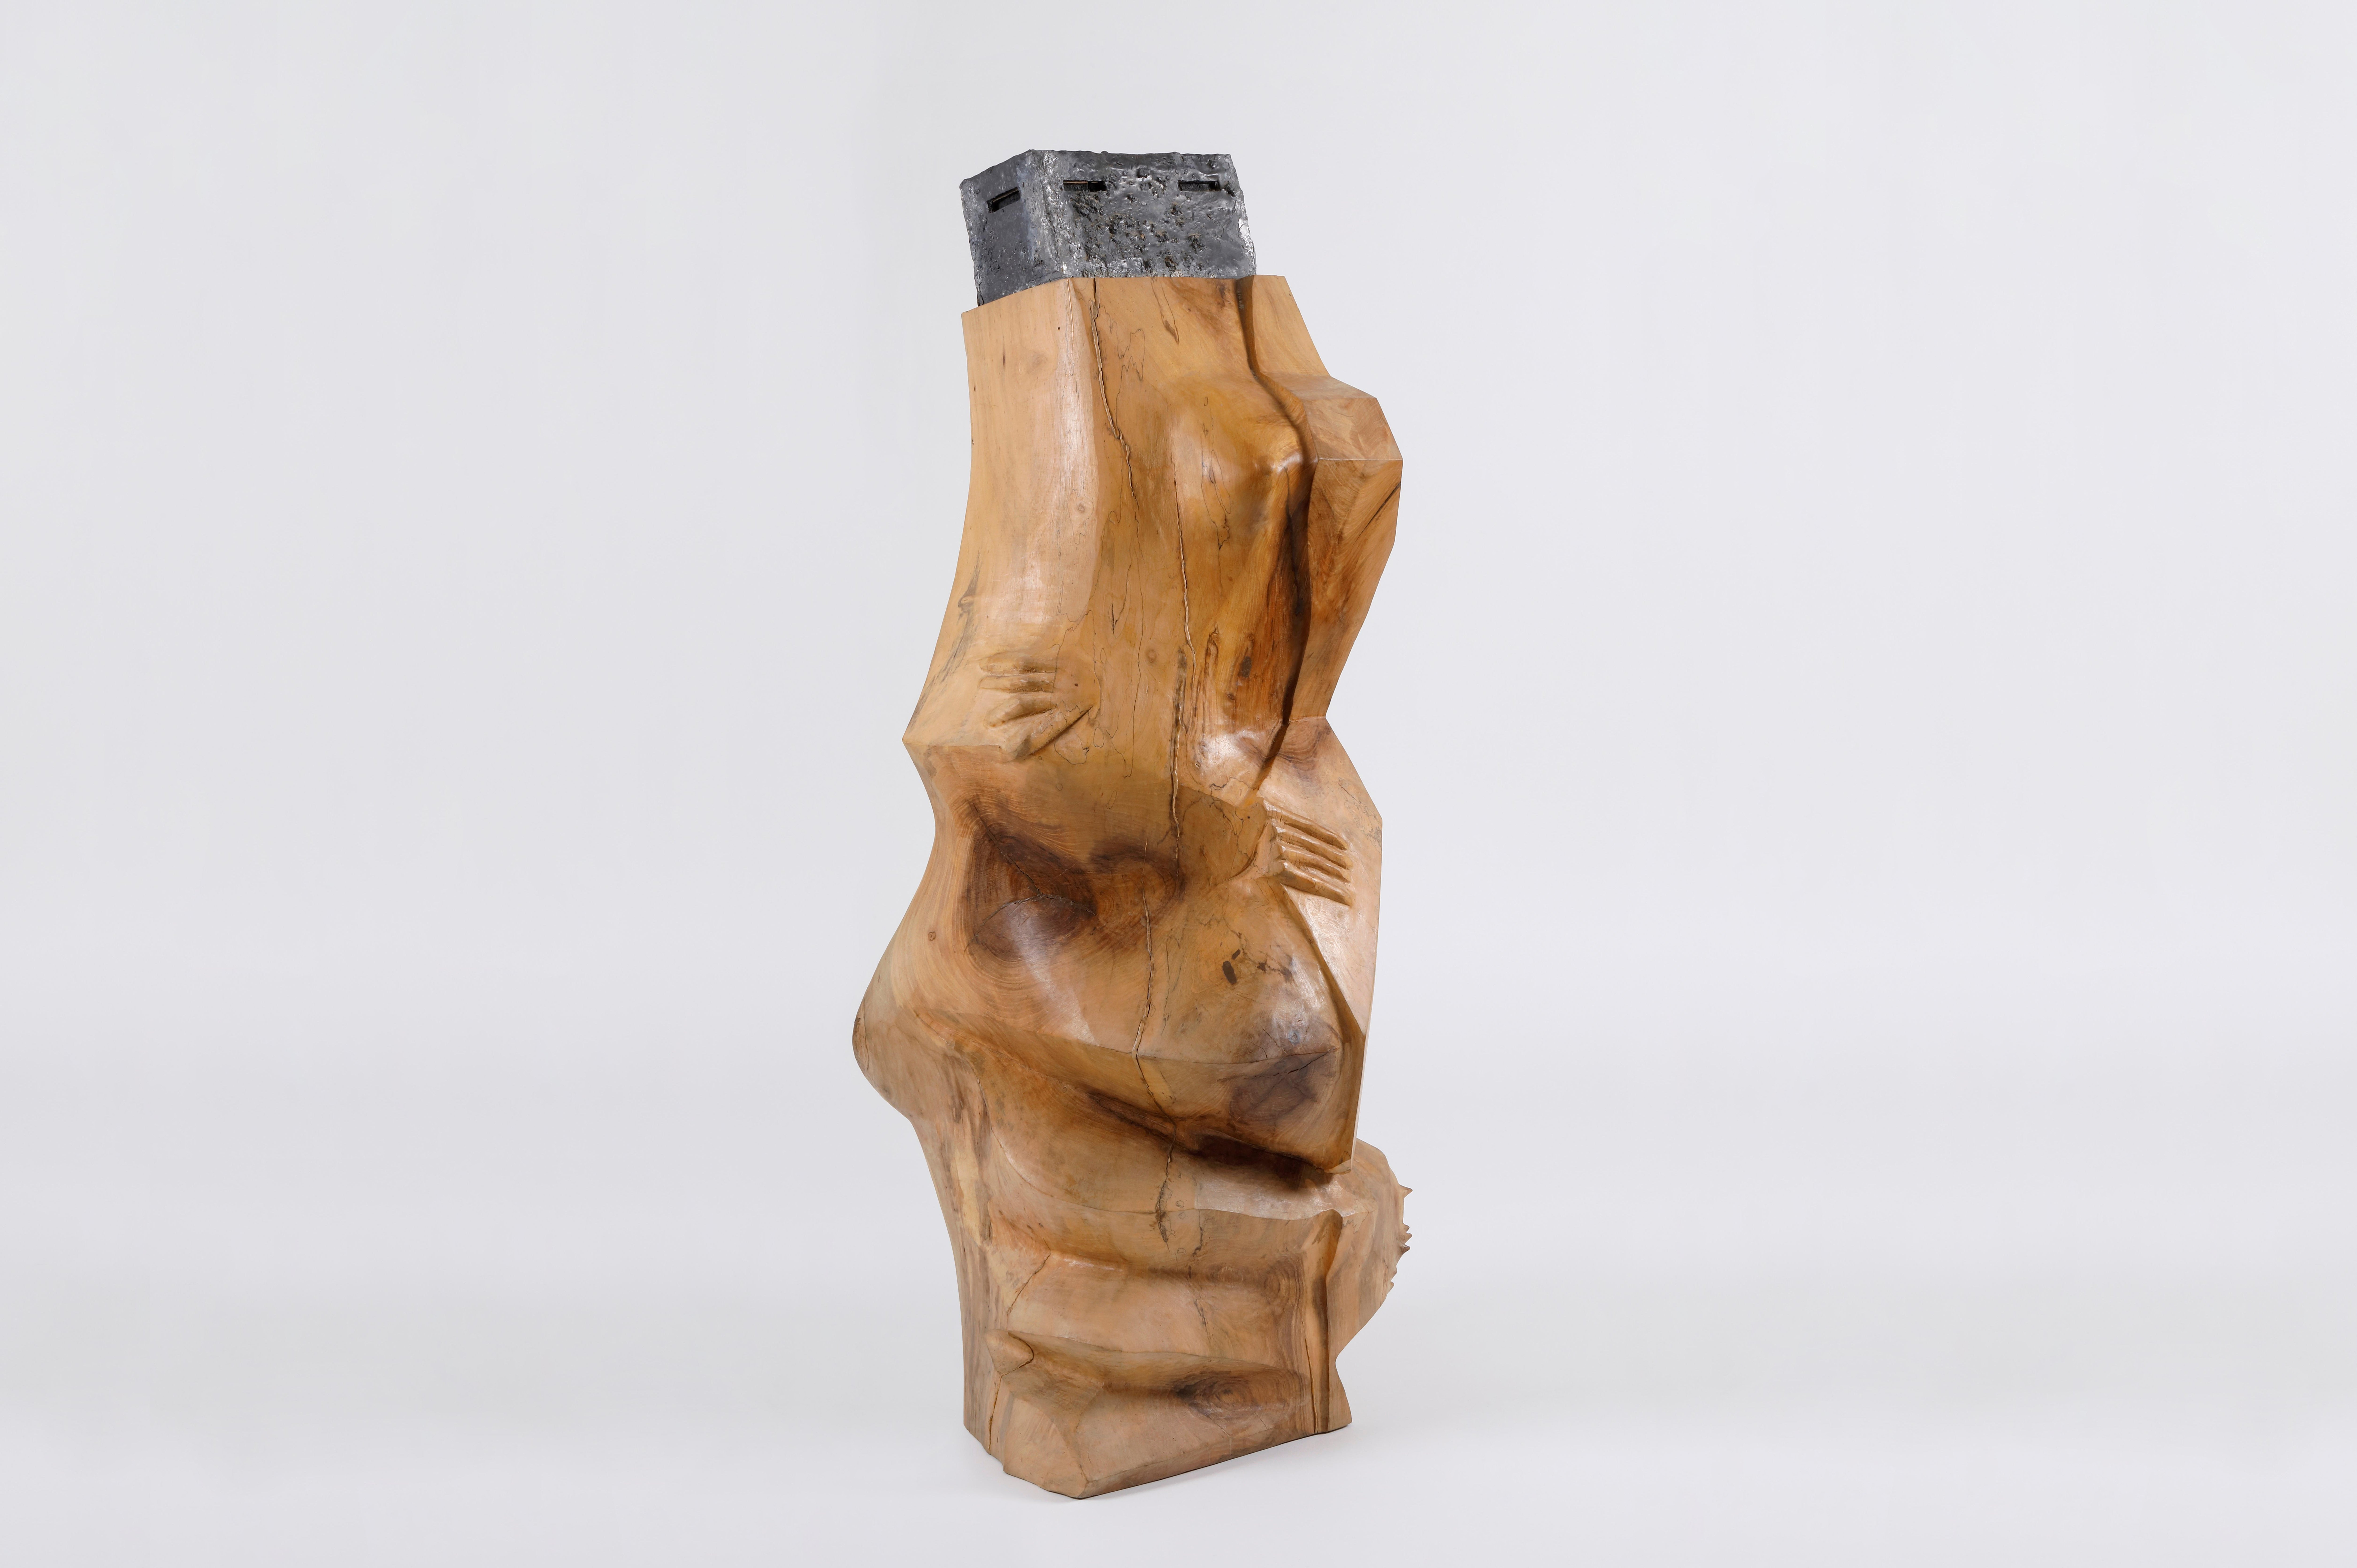 Unusual brutalist hand-carved wooden sculpture, France
Woman bust 